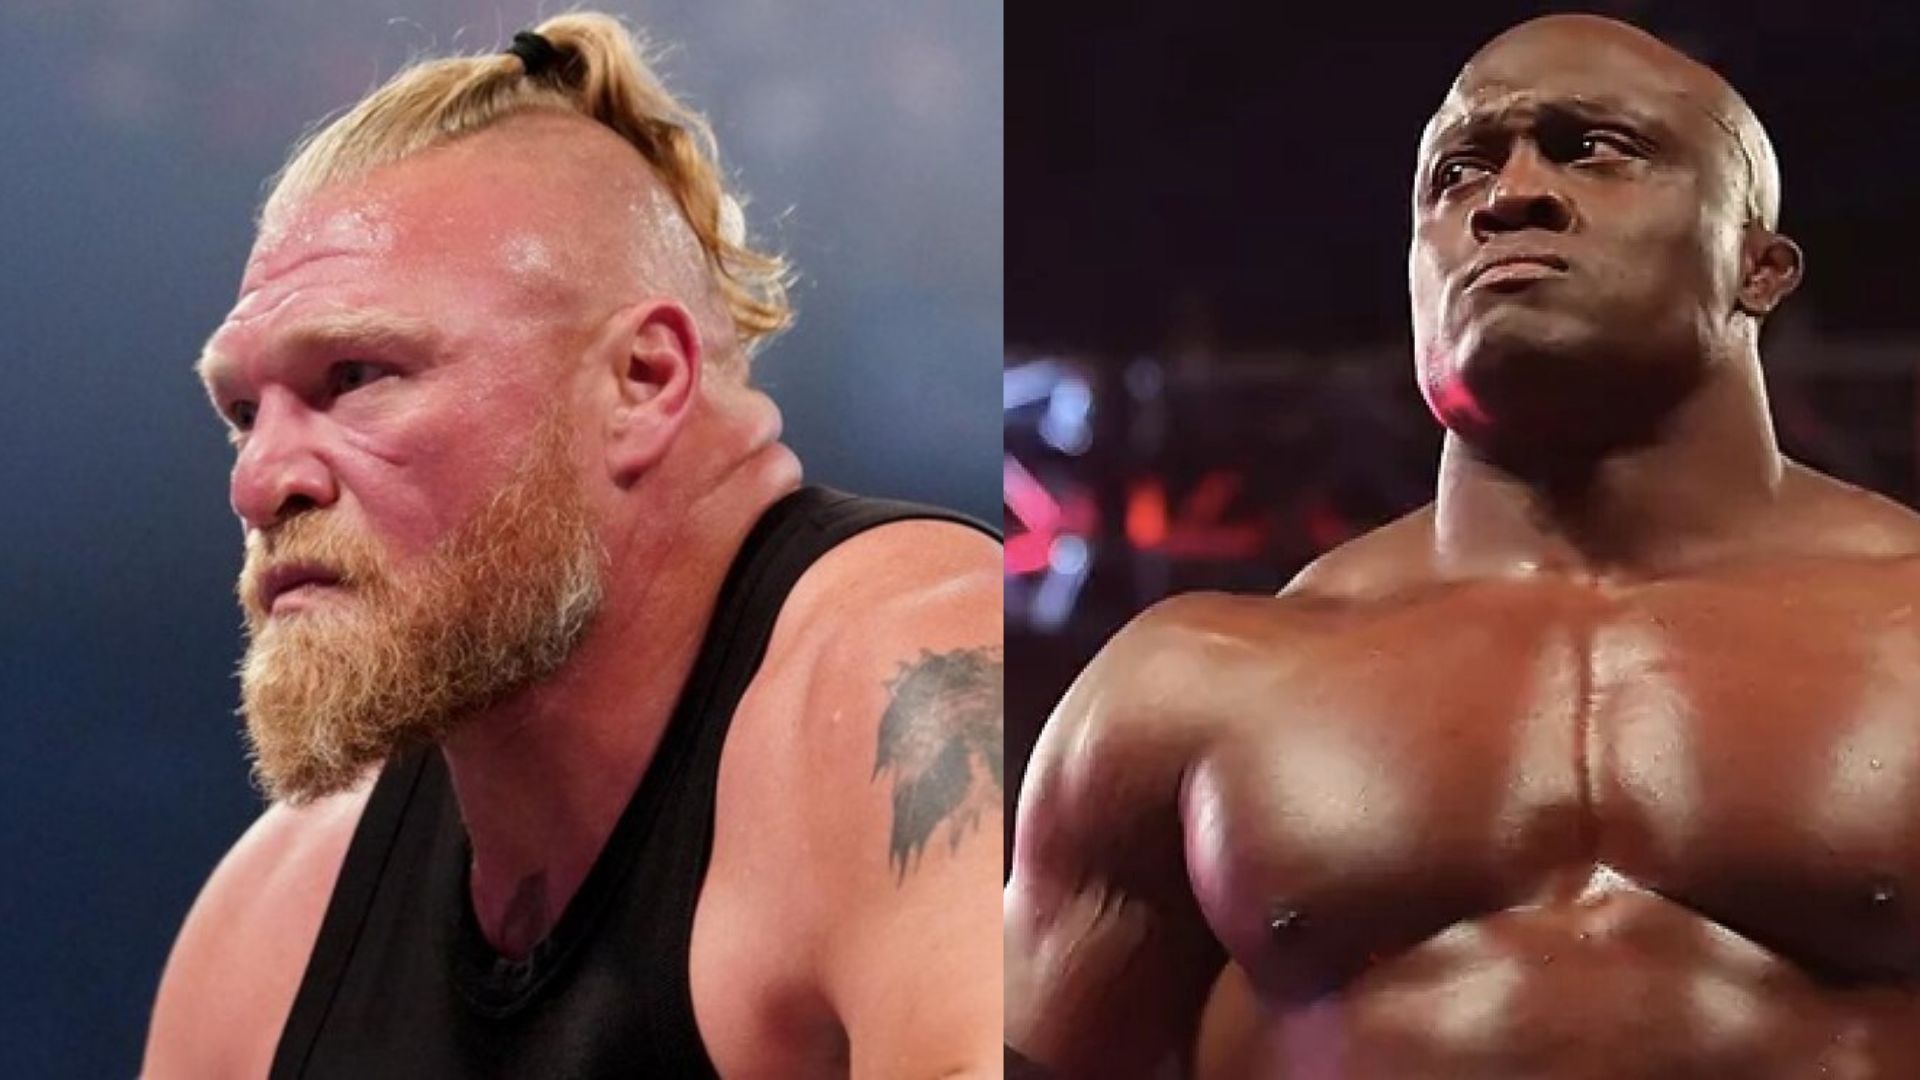 Will Brock Lesnar and Bobby Lashley come face-to-face at WWE Survivor Series?